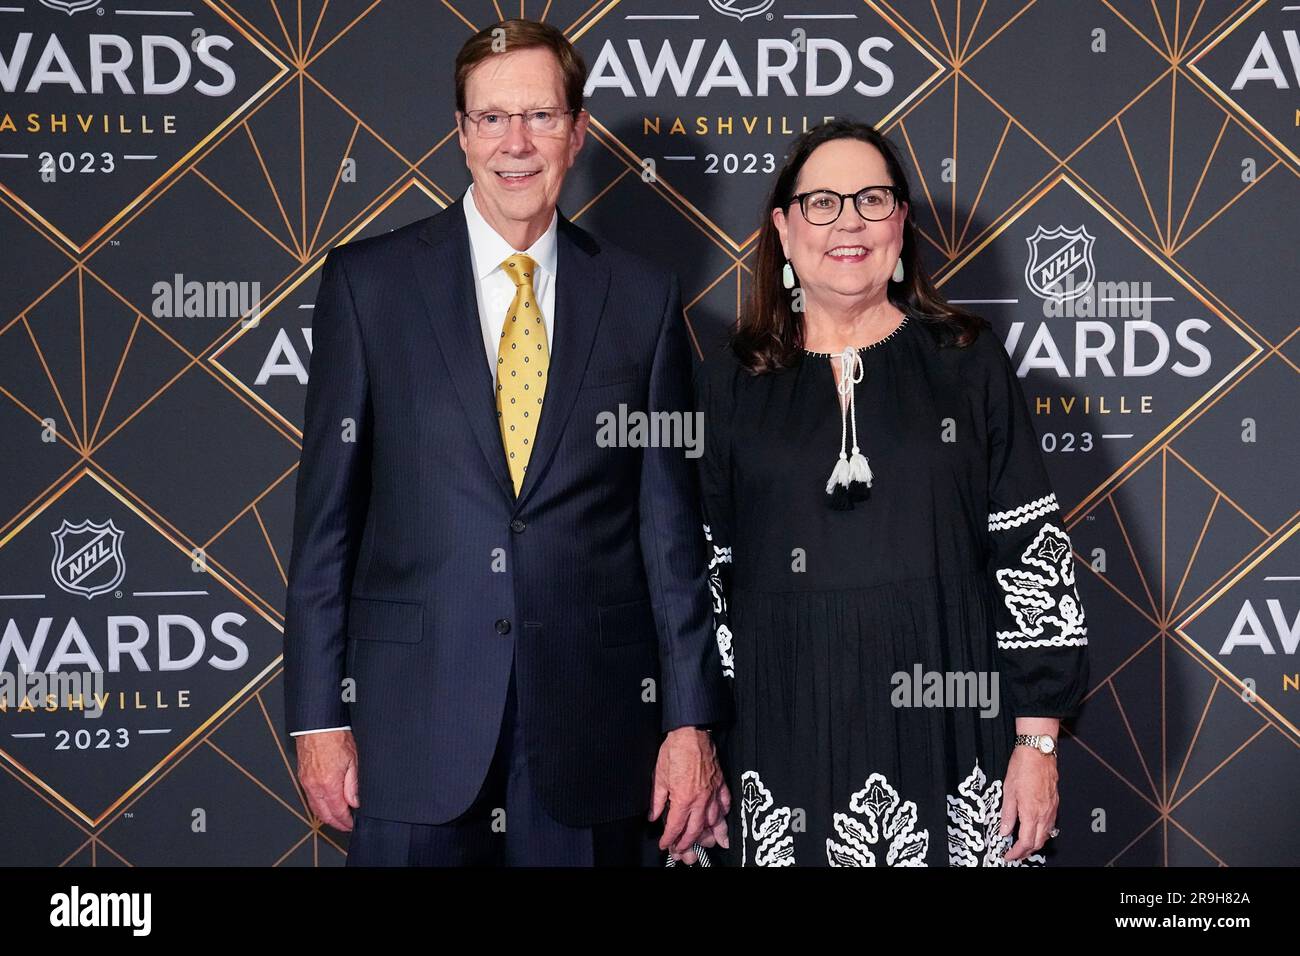 Nashville Predators retiring hockey general manager David Poile, left, and  his wife Elizabeth Poile, right, pose on the red carpet before the NHL  Awards, Monday, June 26, 2023, in Nashville, Tenn. (AP